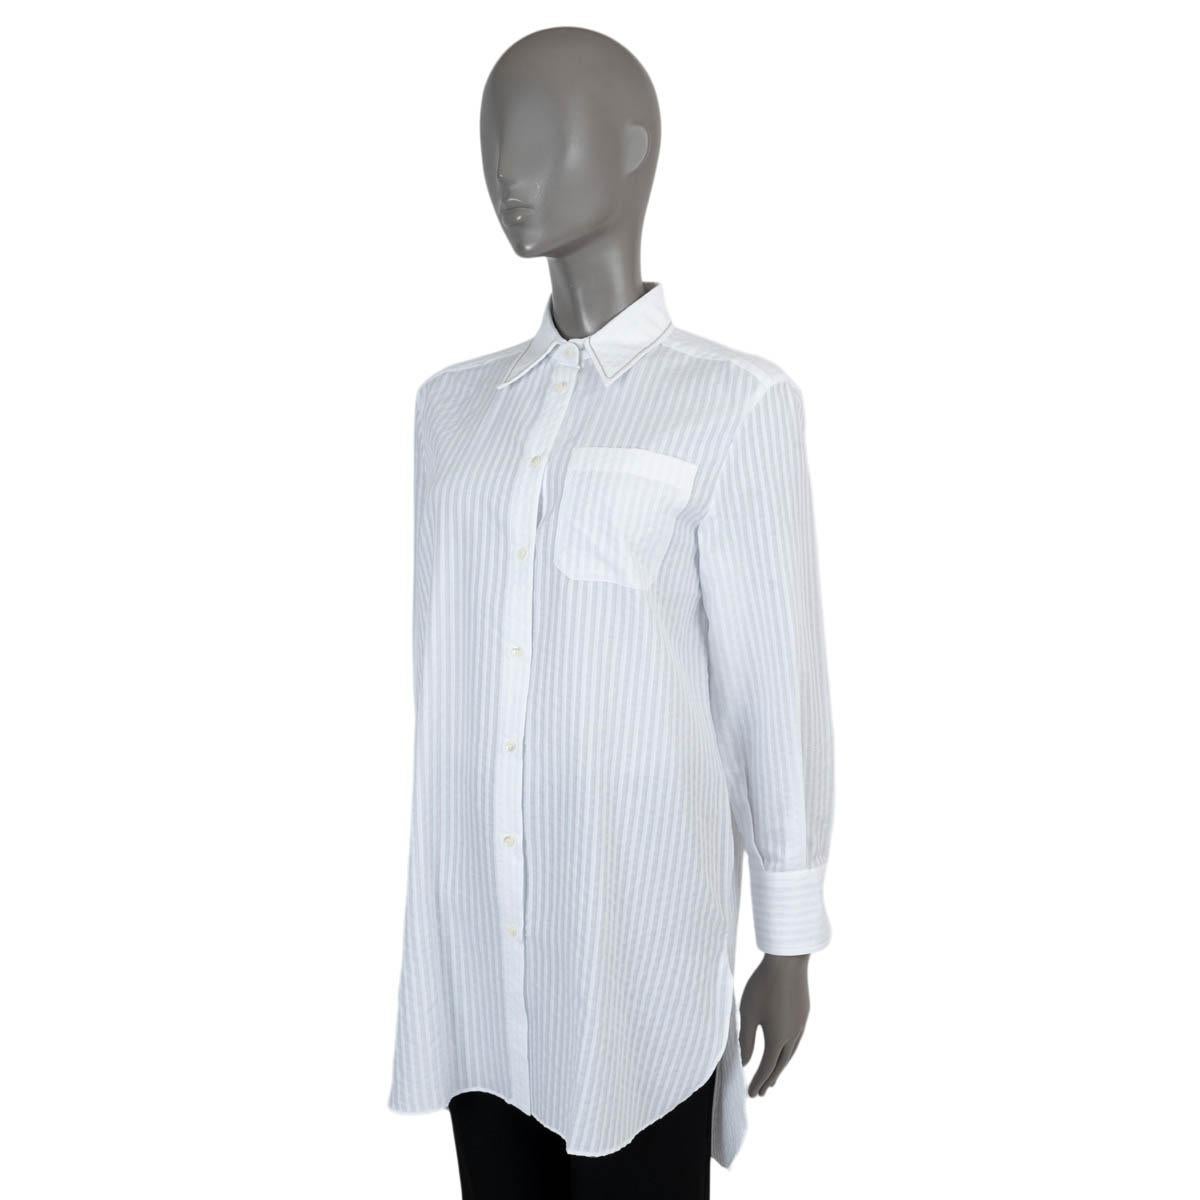 100% authentic Brunello Cucinelli striped jacquard button-up tunic shirt in white cotton (100%). Features a Monili trim along the collar and open chest pocket. Closes with buttons down the front. Has been worn and is in excellent condition.